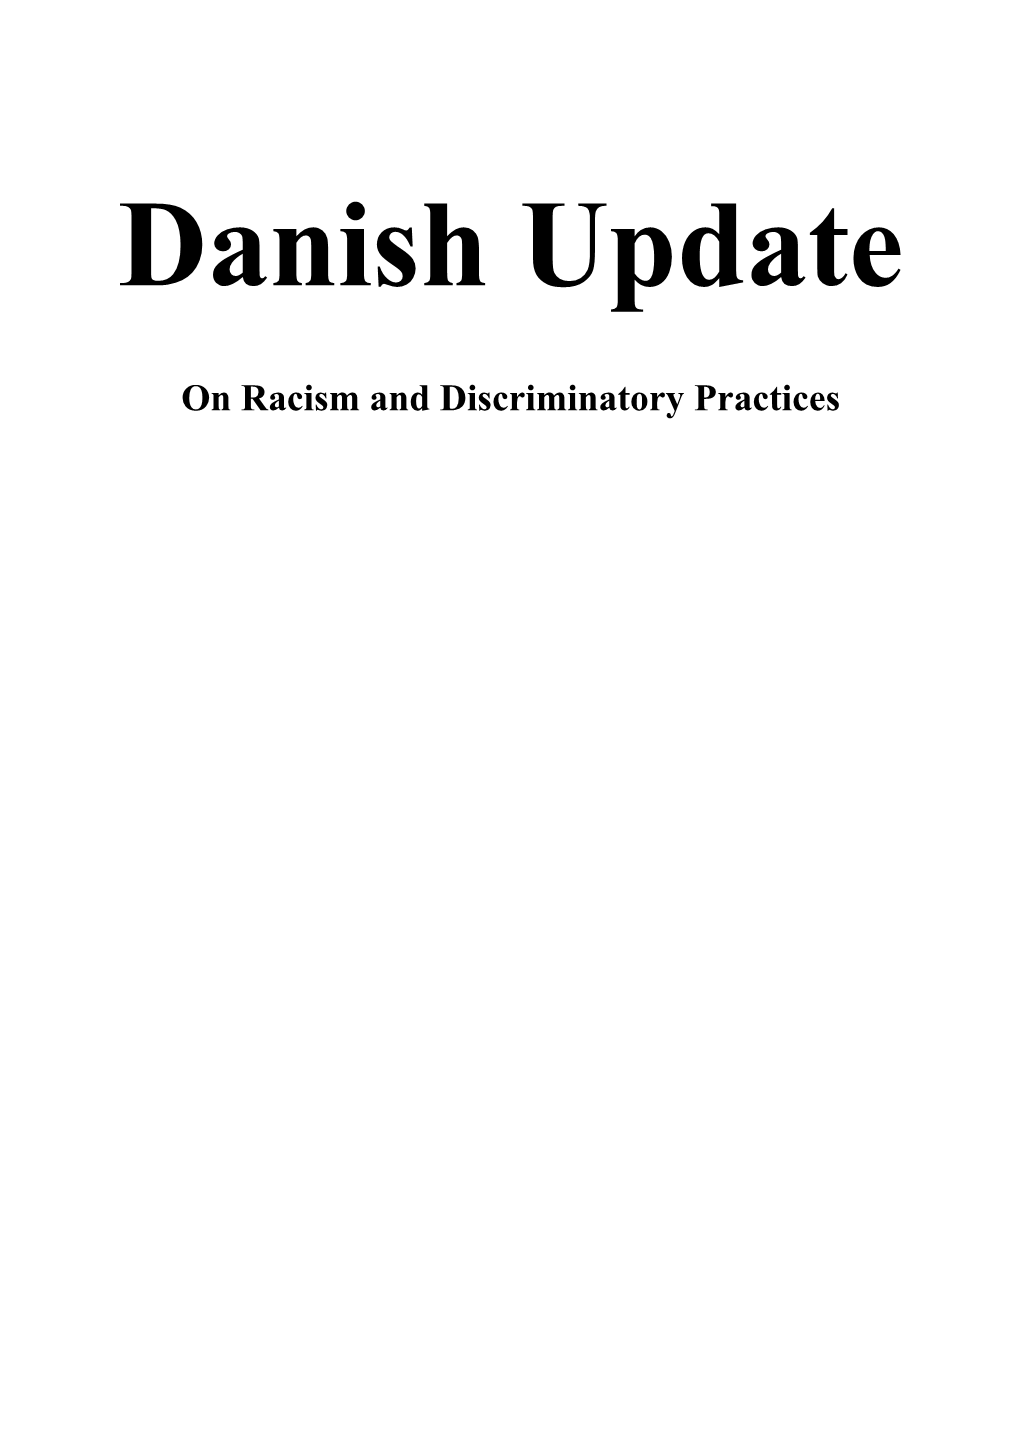 On Racism and Discriminatory Practices